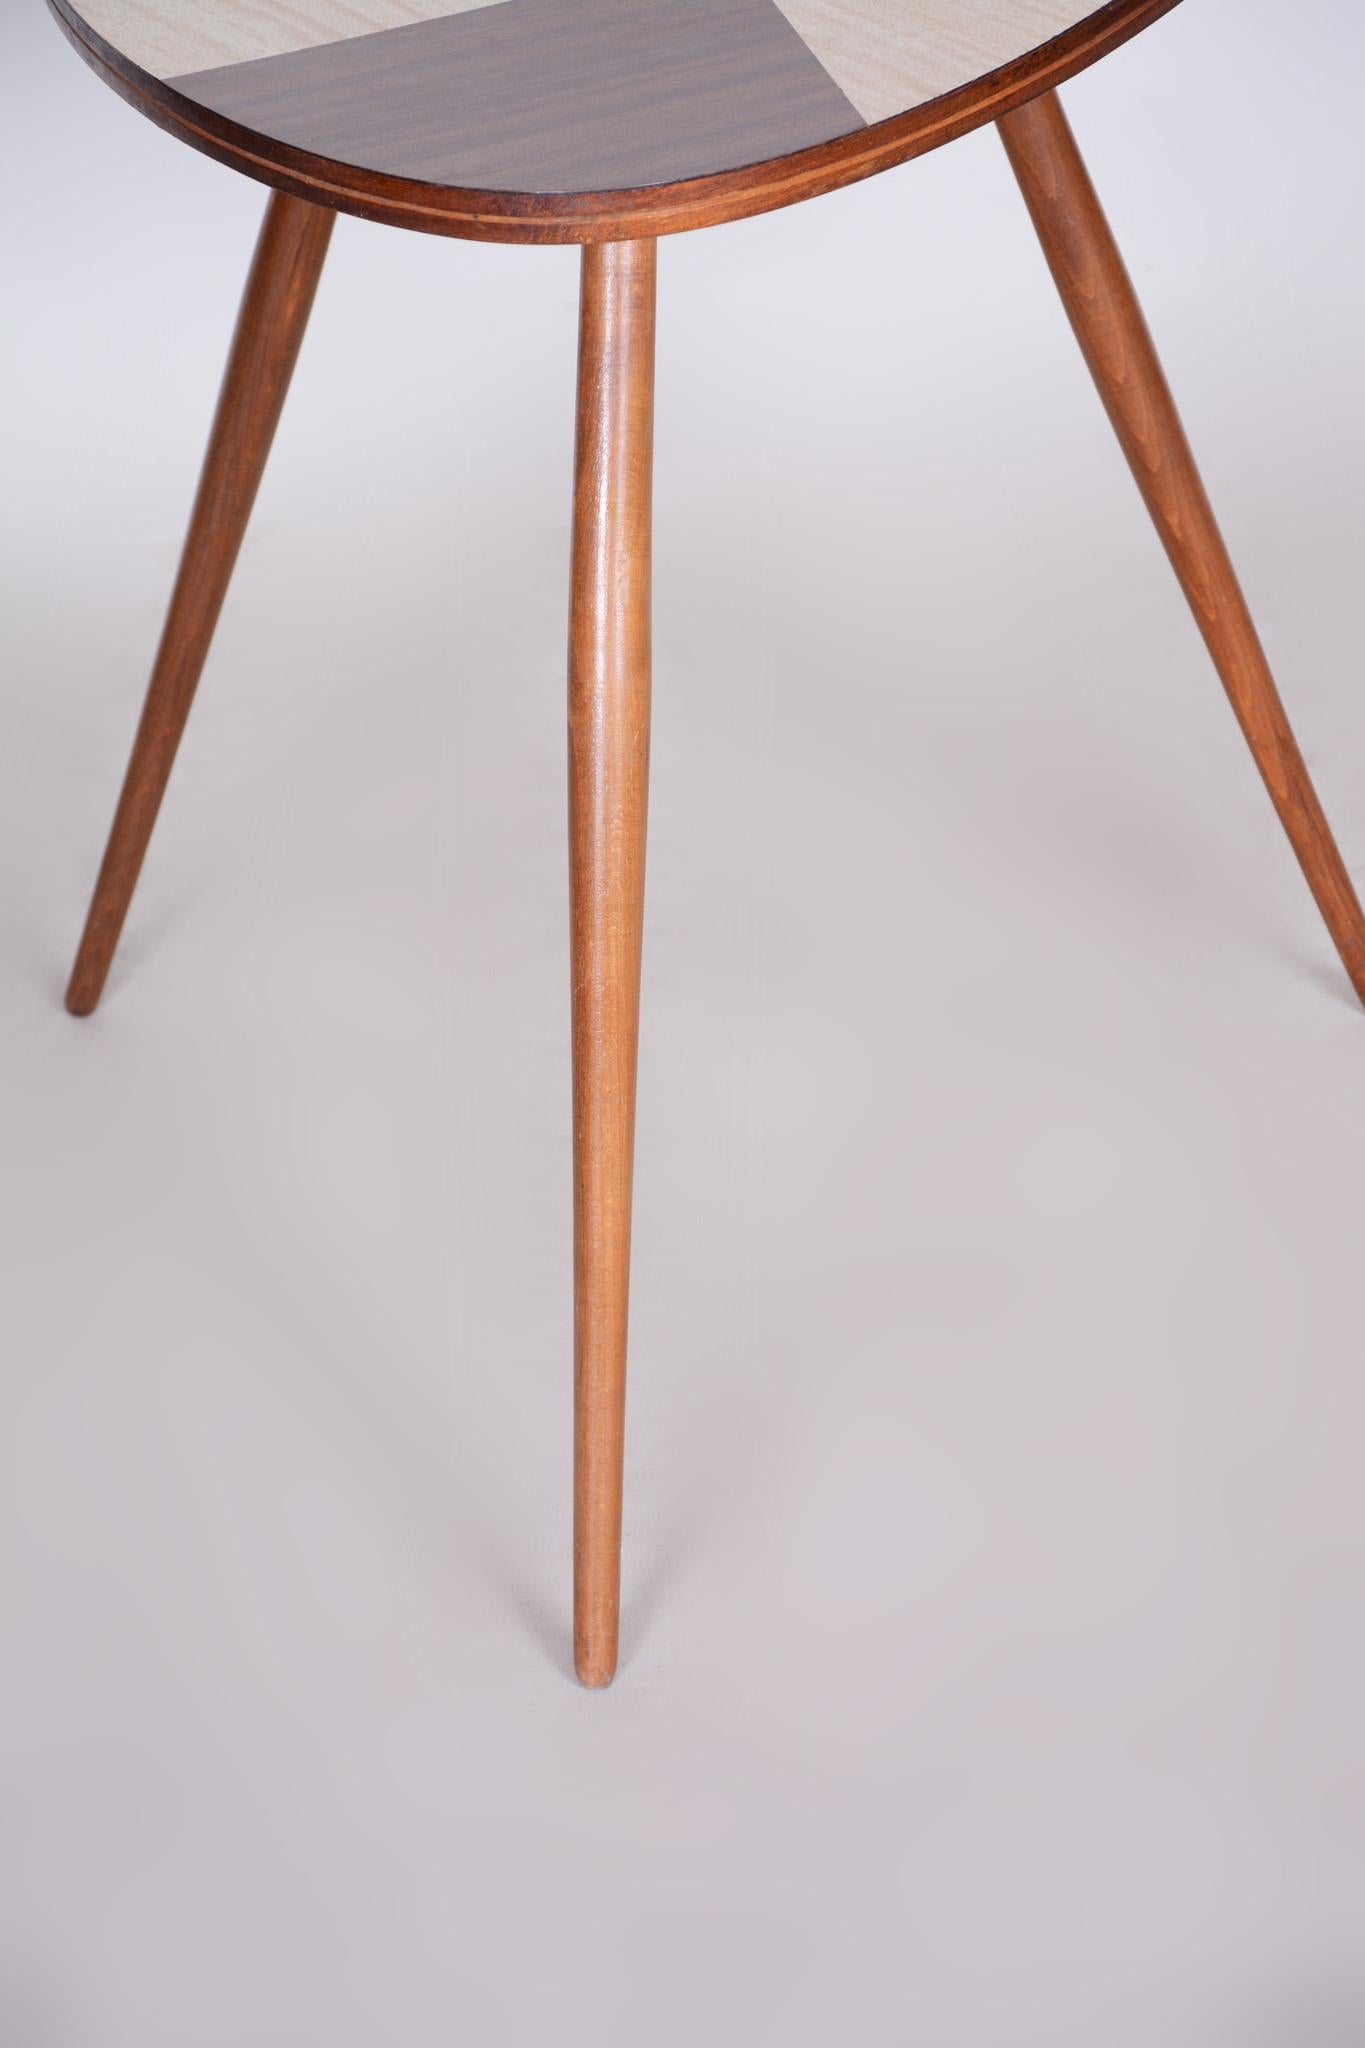 Small Mid Century Table, Made in Czechia, 1950s, Original Condition. Beech For Sale 2